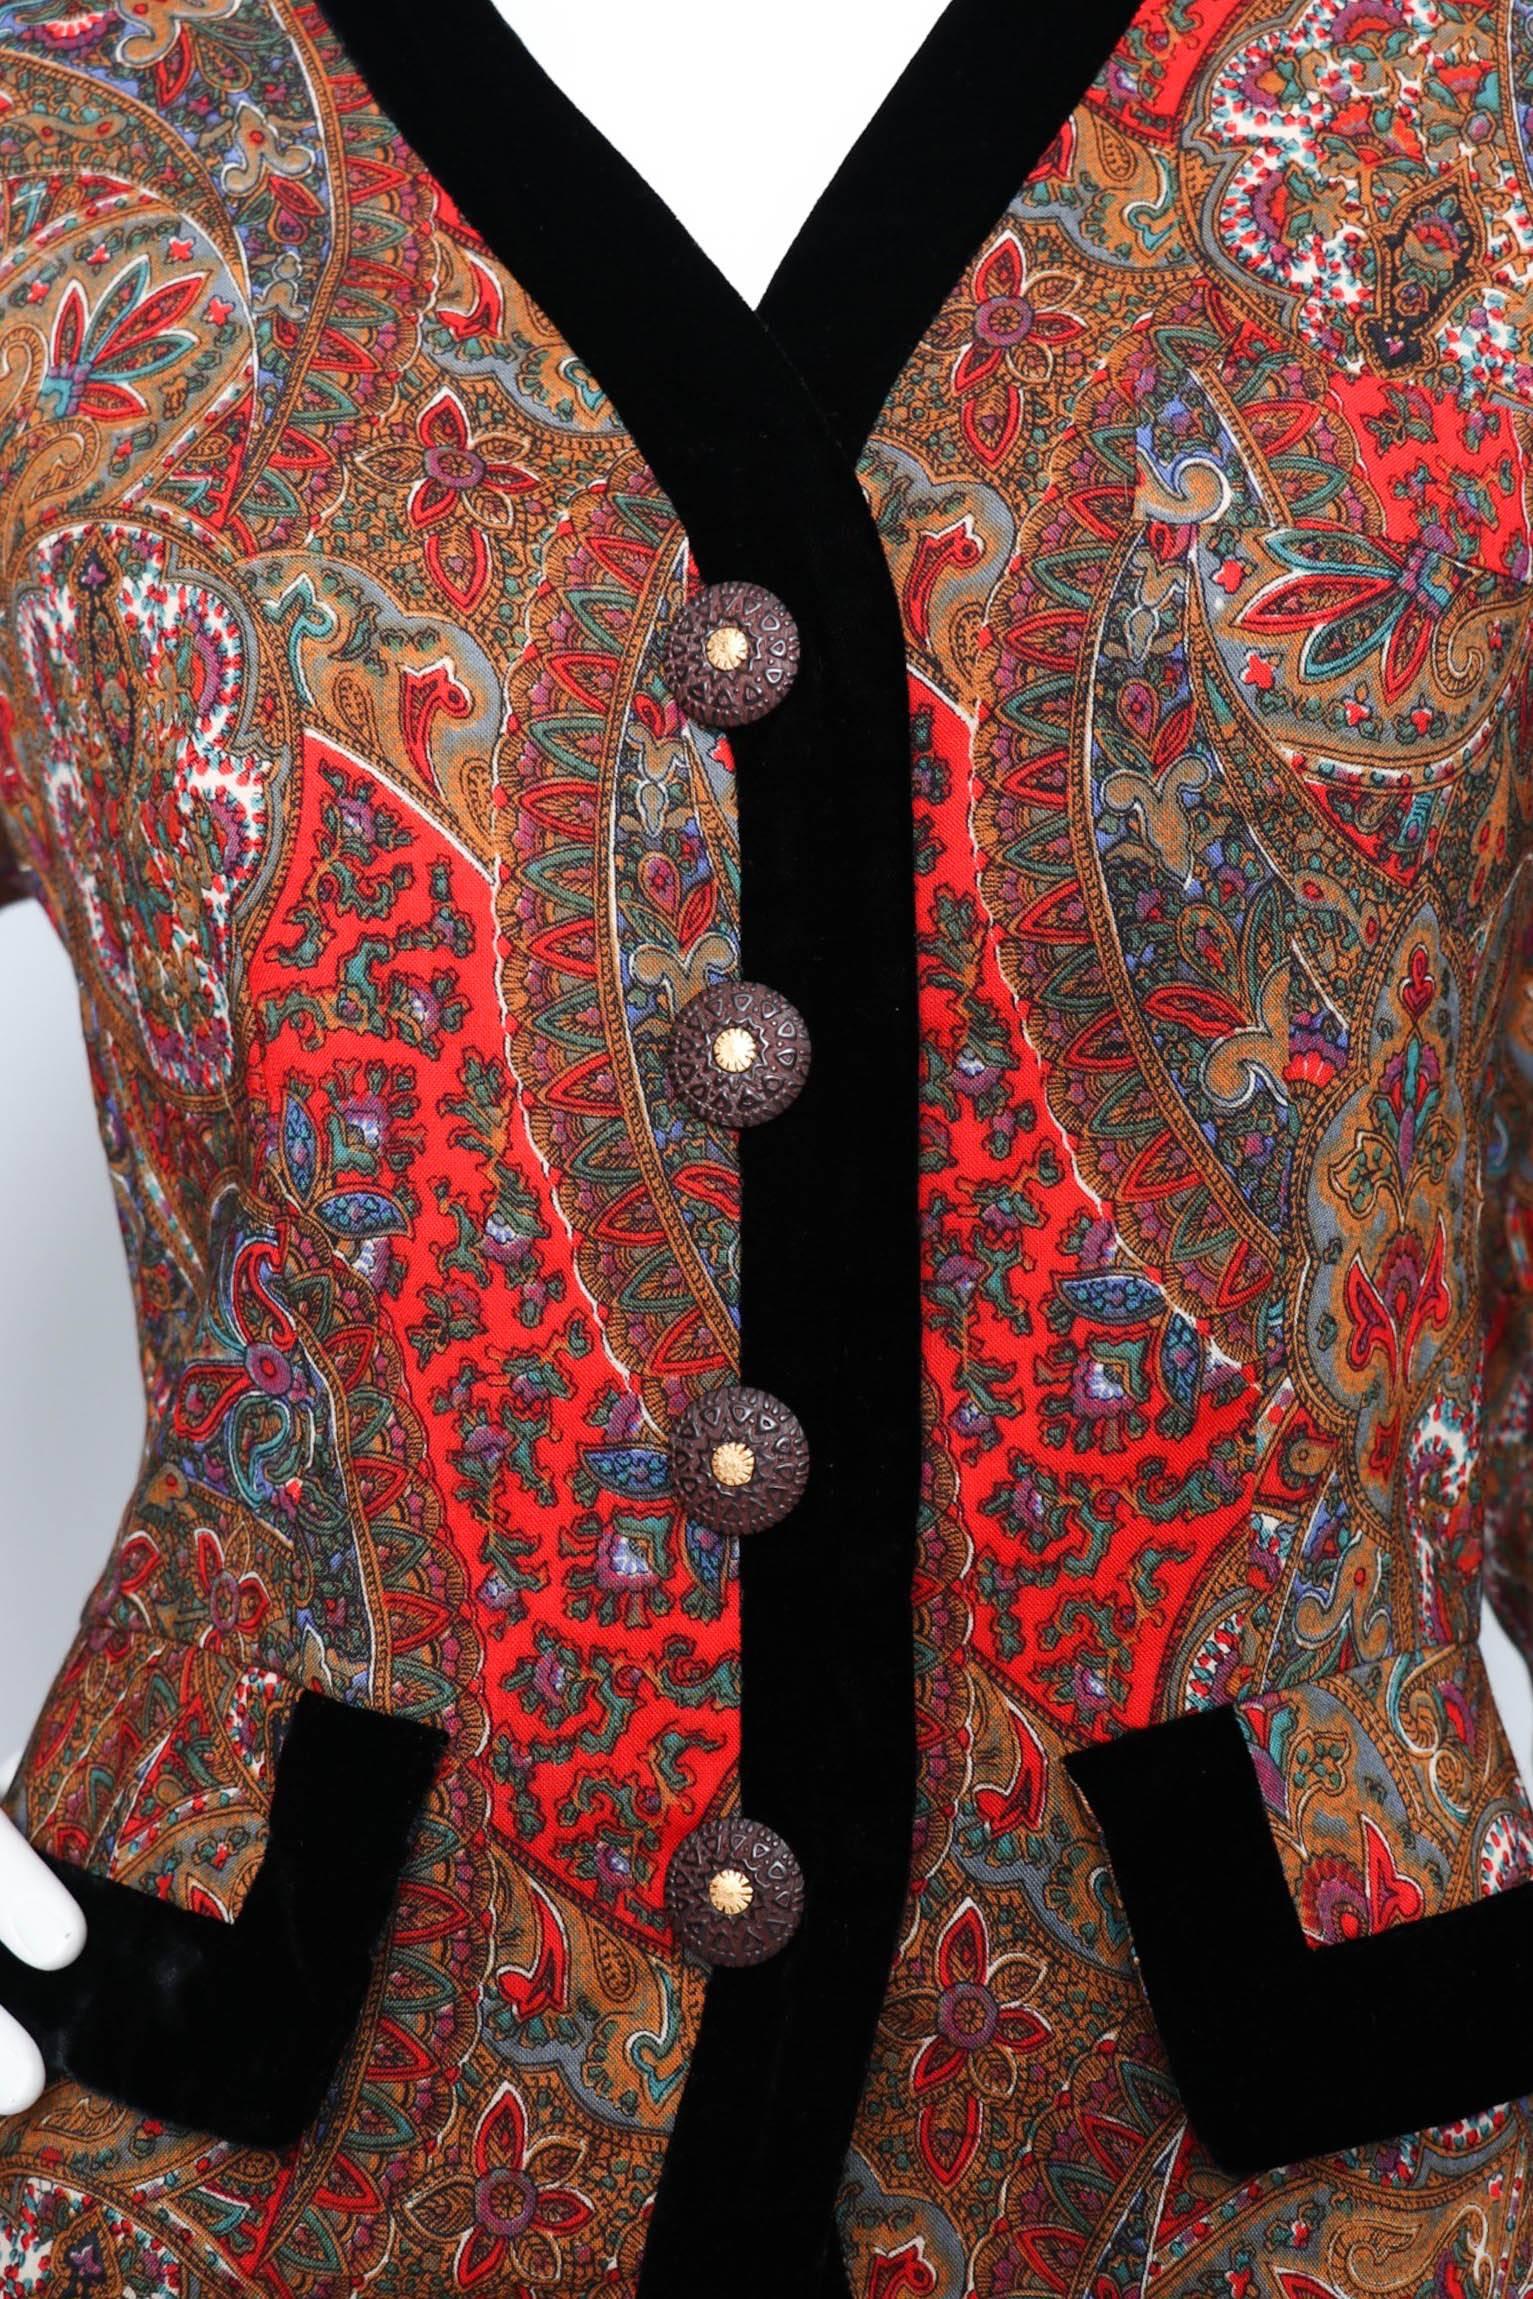 A beautiful 1980s vintage Yves Saint Laurent blazer with wide shoulders and a nipped-in waist. The blazer is clad in a paisley print held in a red, blue, green and yellow colors with white accents. A black velvet trim is wrapped around the collar,